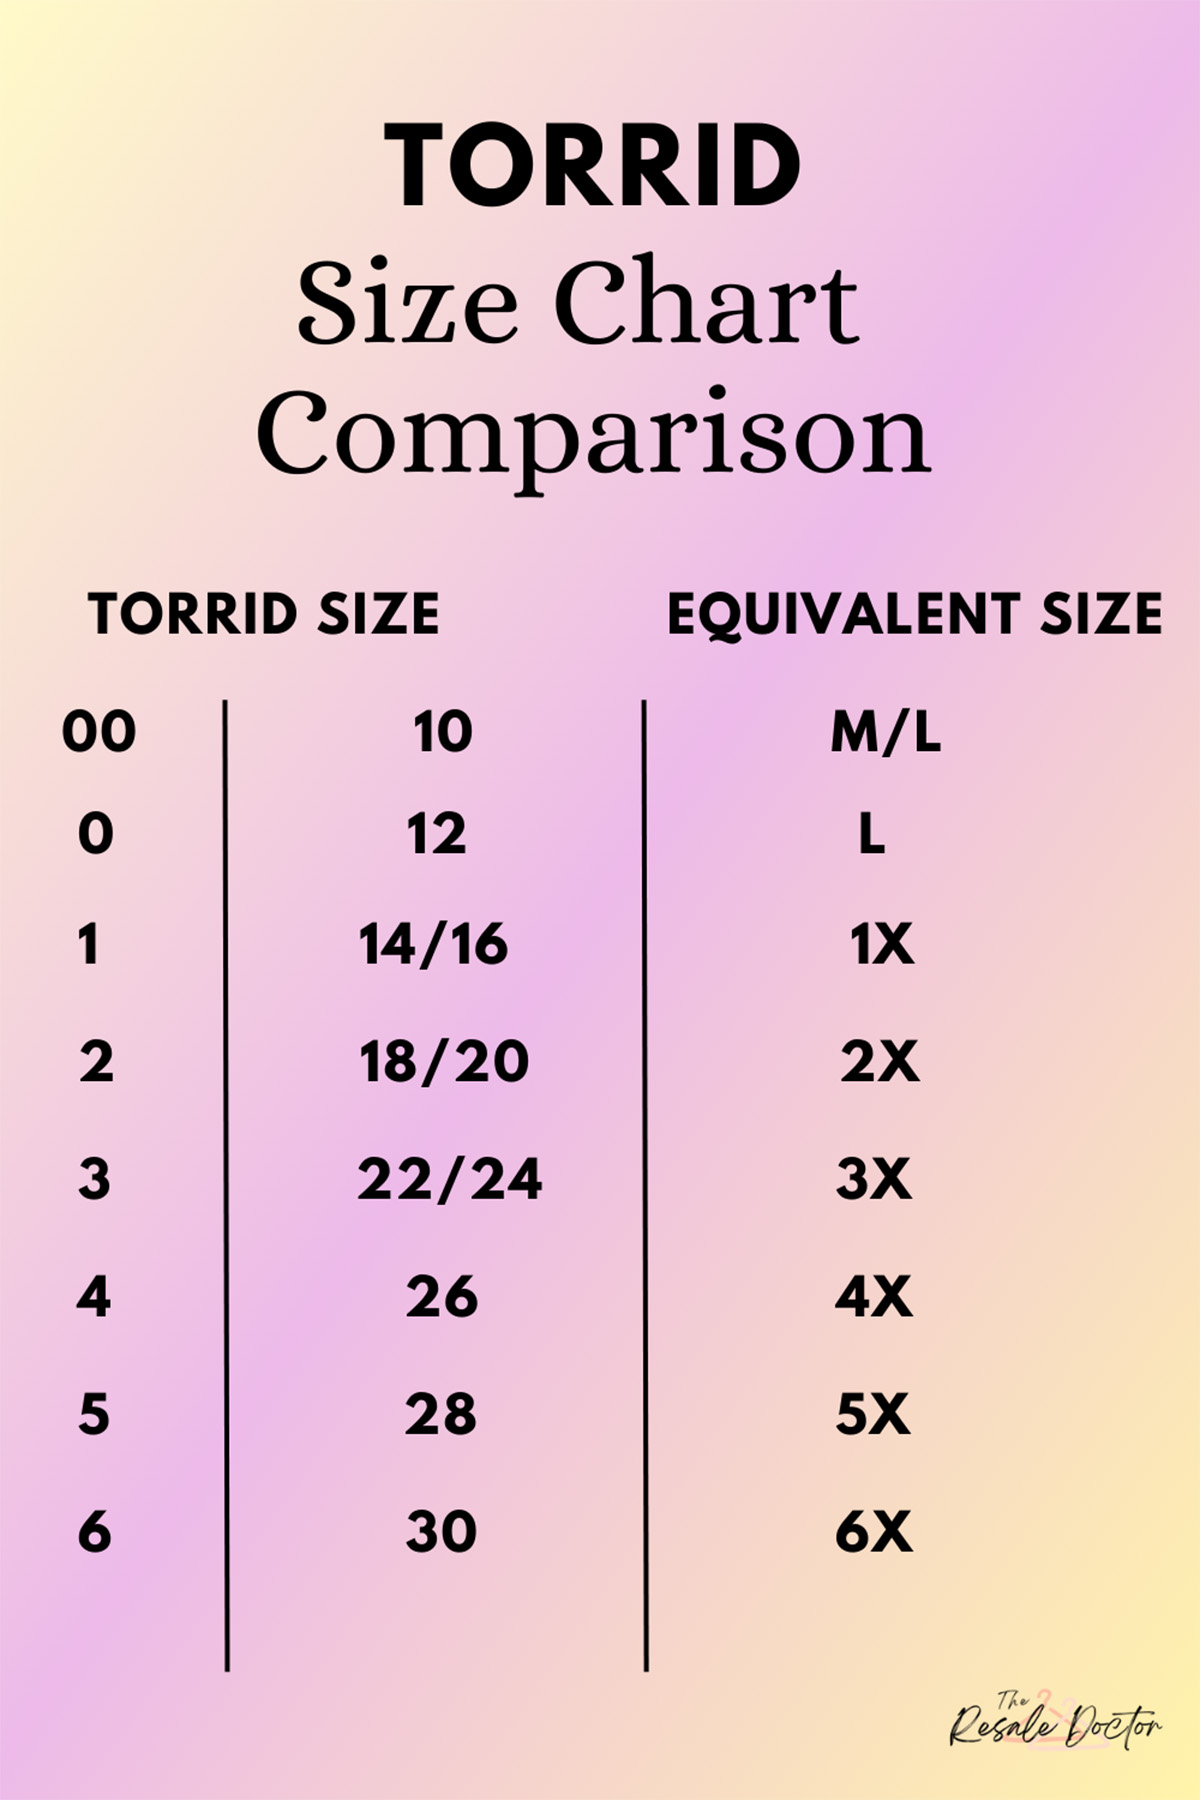 a size chart showing torrid sizes with their equivalent sizes.